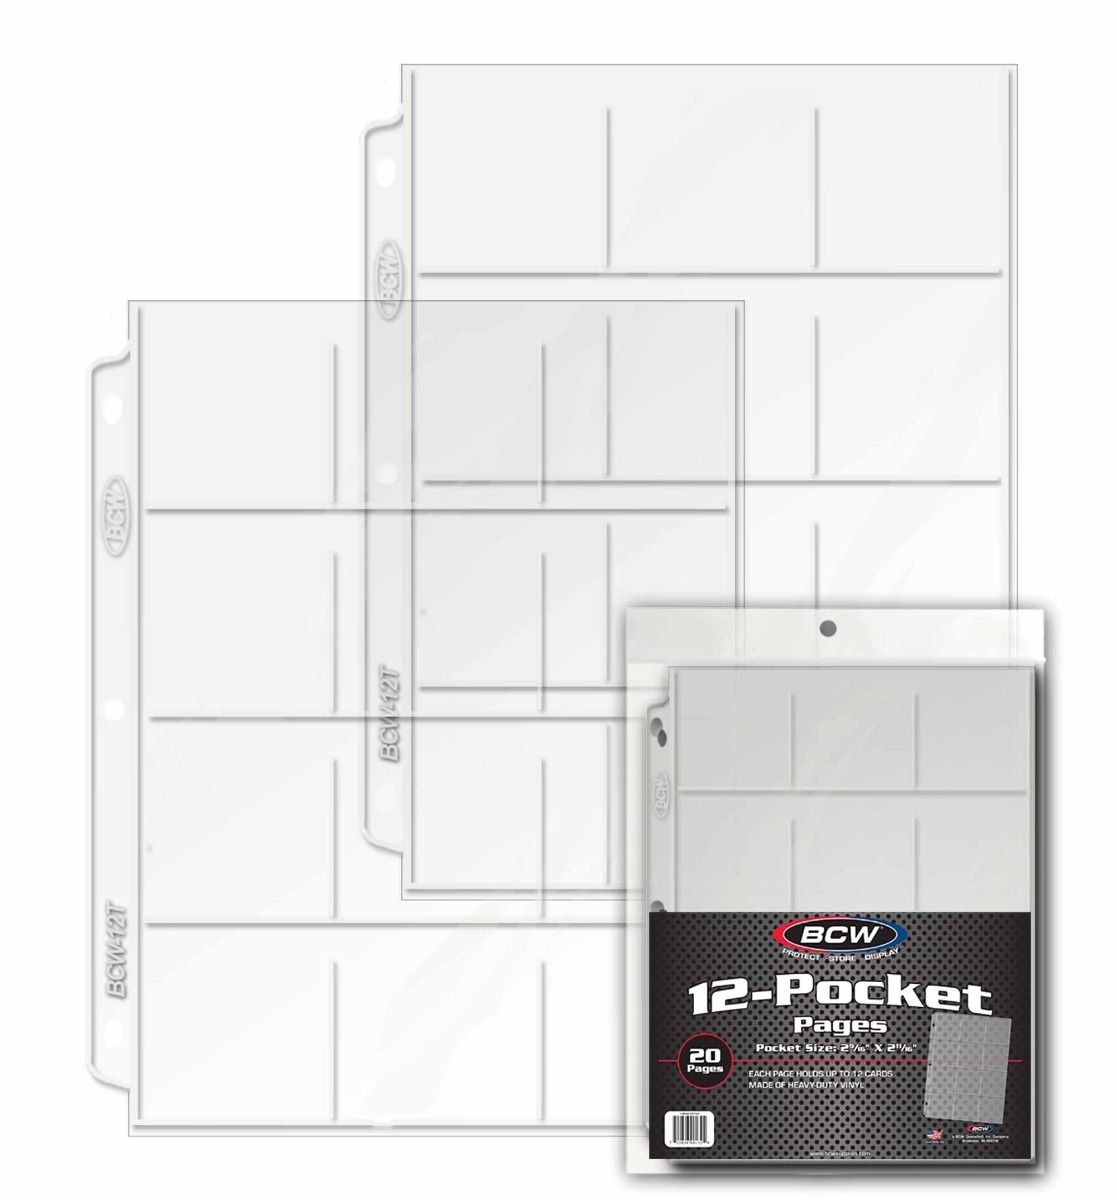 BCW Vinyl 12-Pocket Pages (20 CT. Pack)